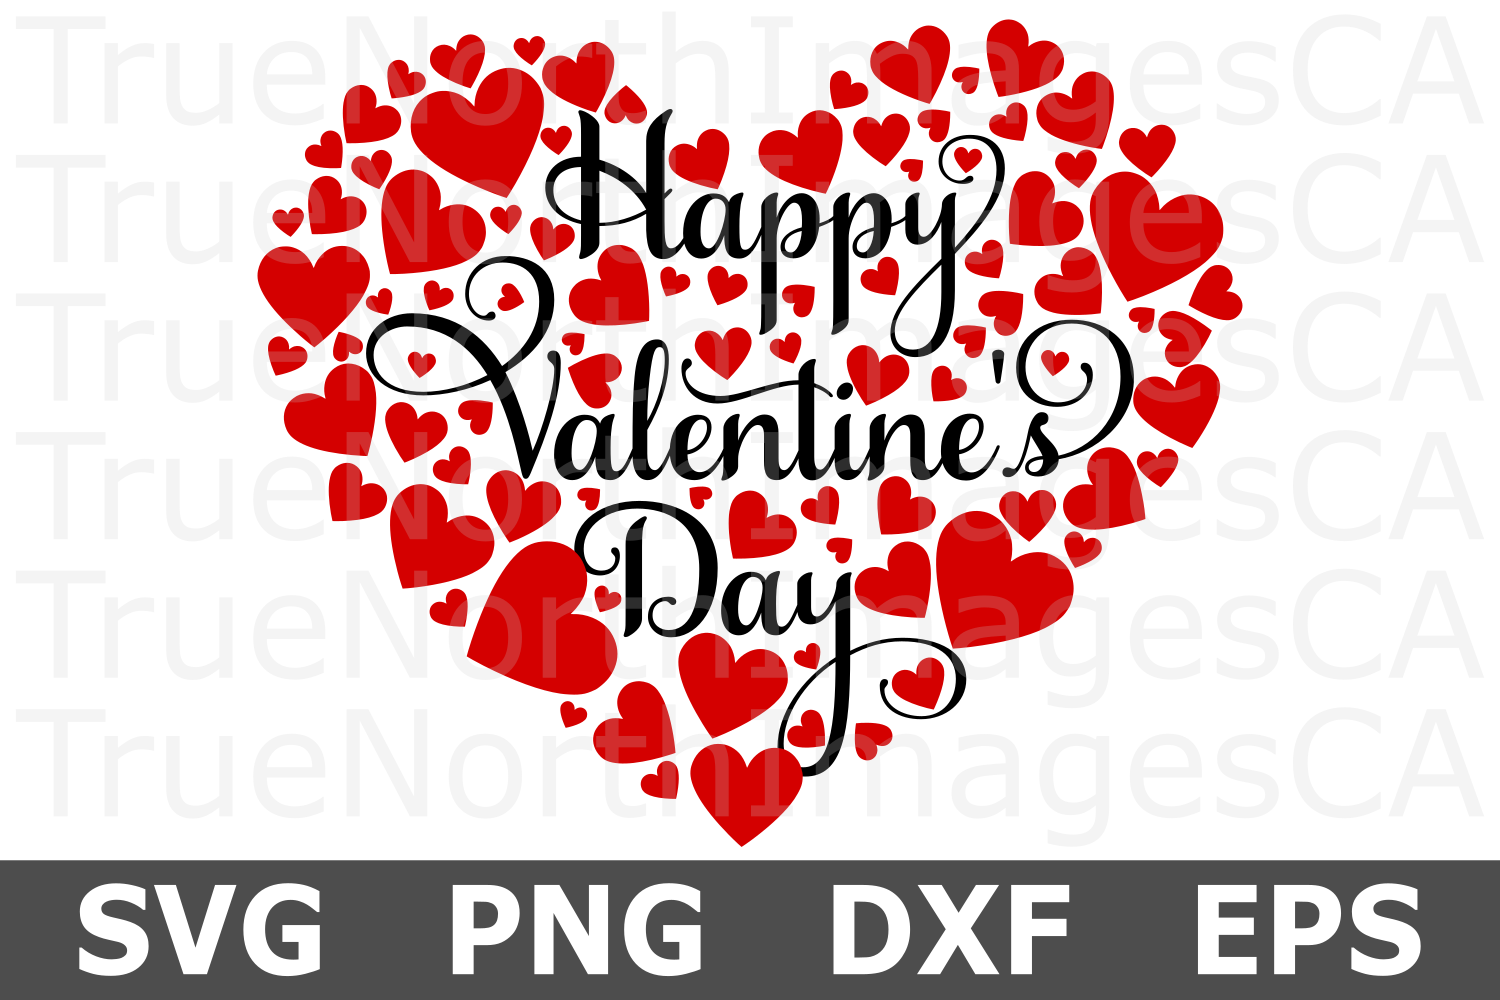 Happy Valentines Day Heart - A Valentine SVG Cut File